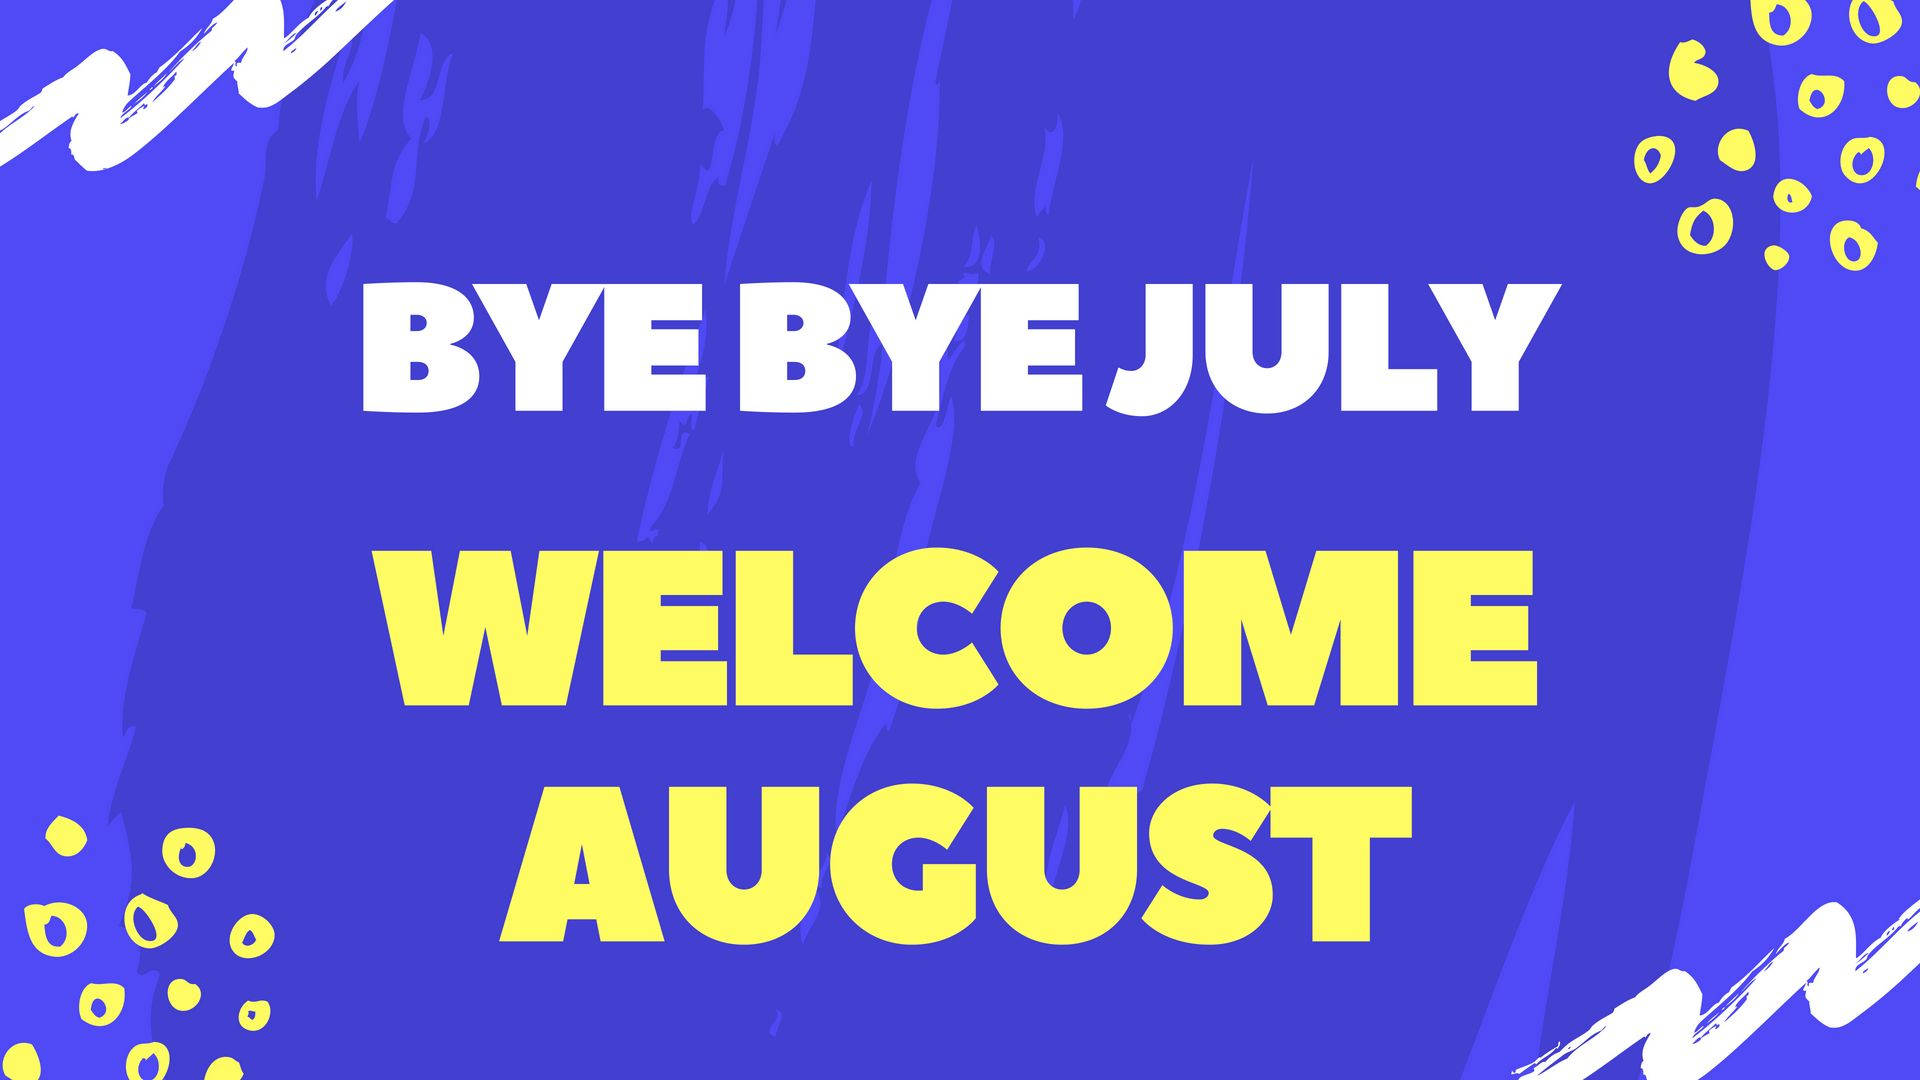 Bye July, Welcome August